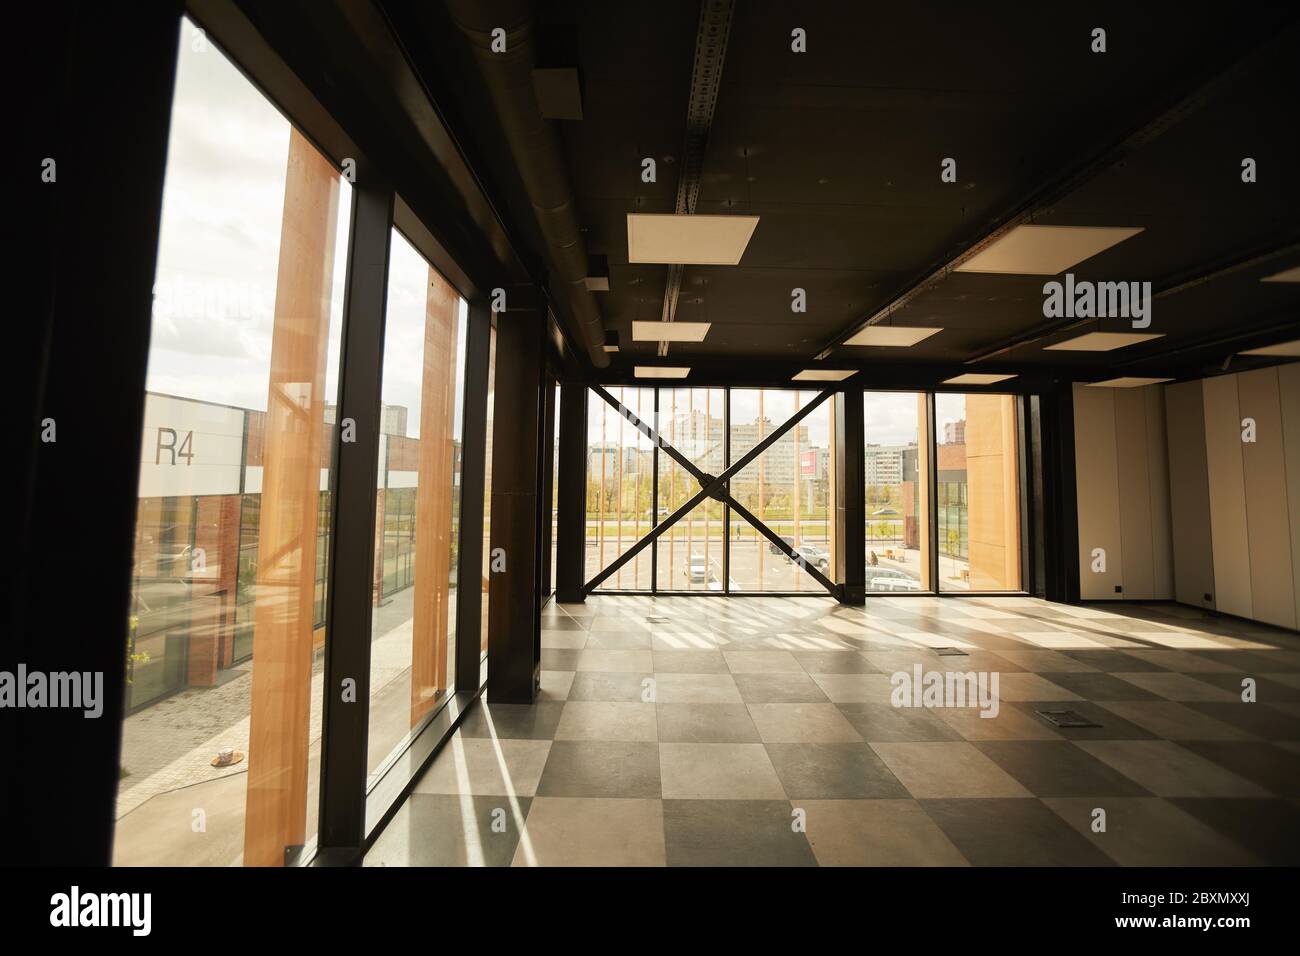 Background image of empty office building interior with contemporary graphic design, copy space Stock Photo